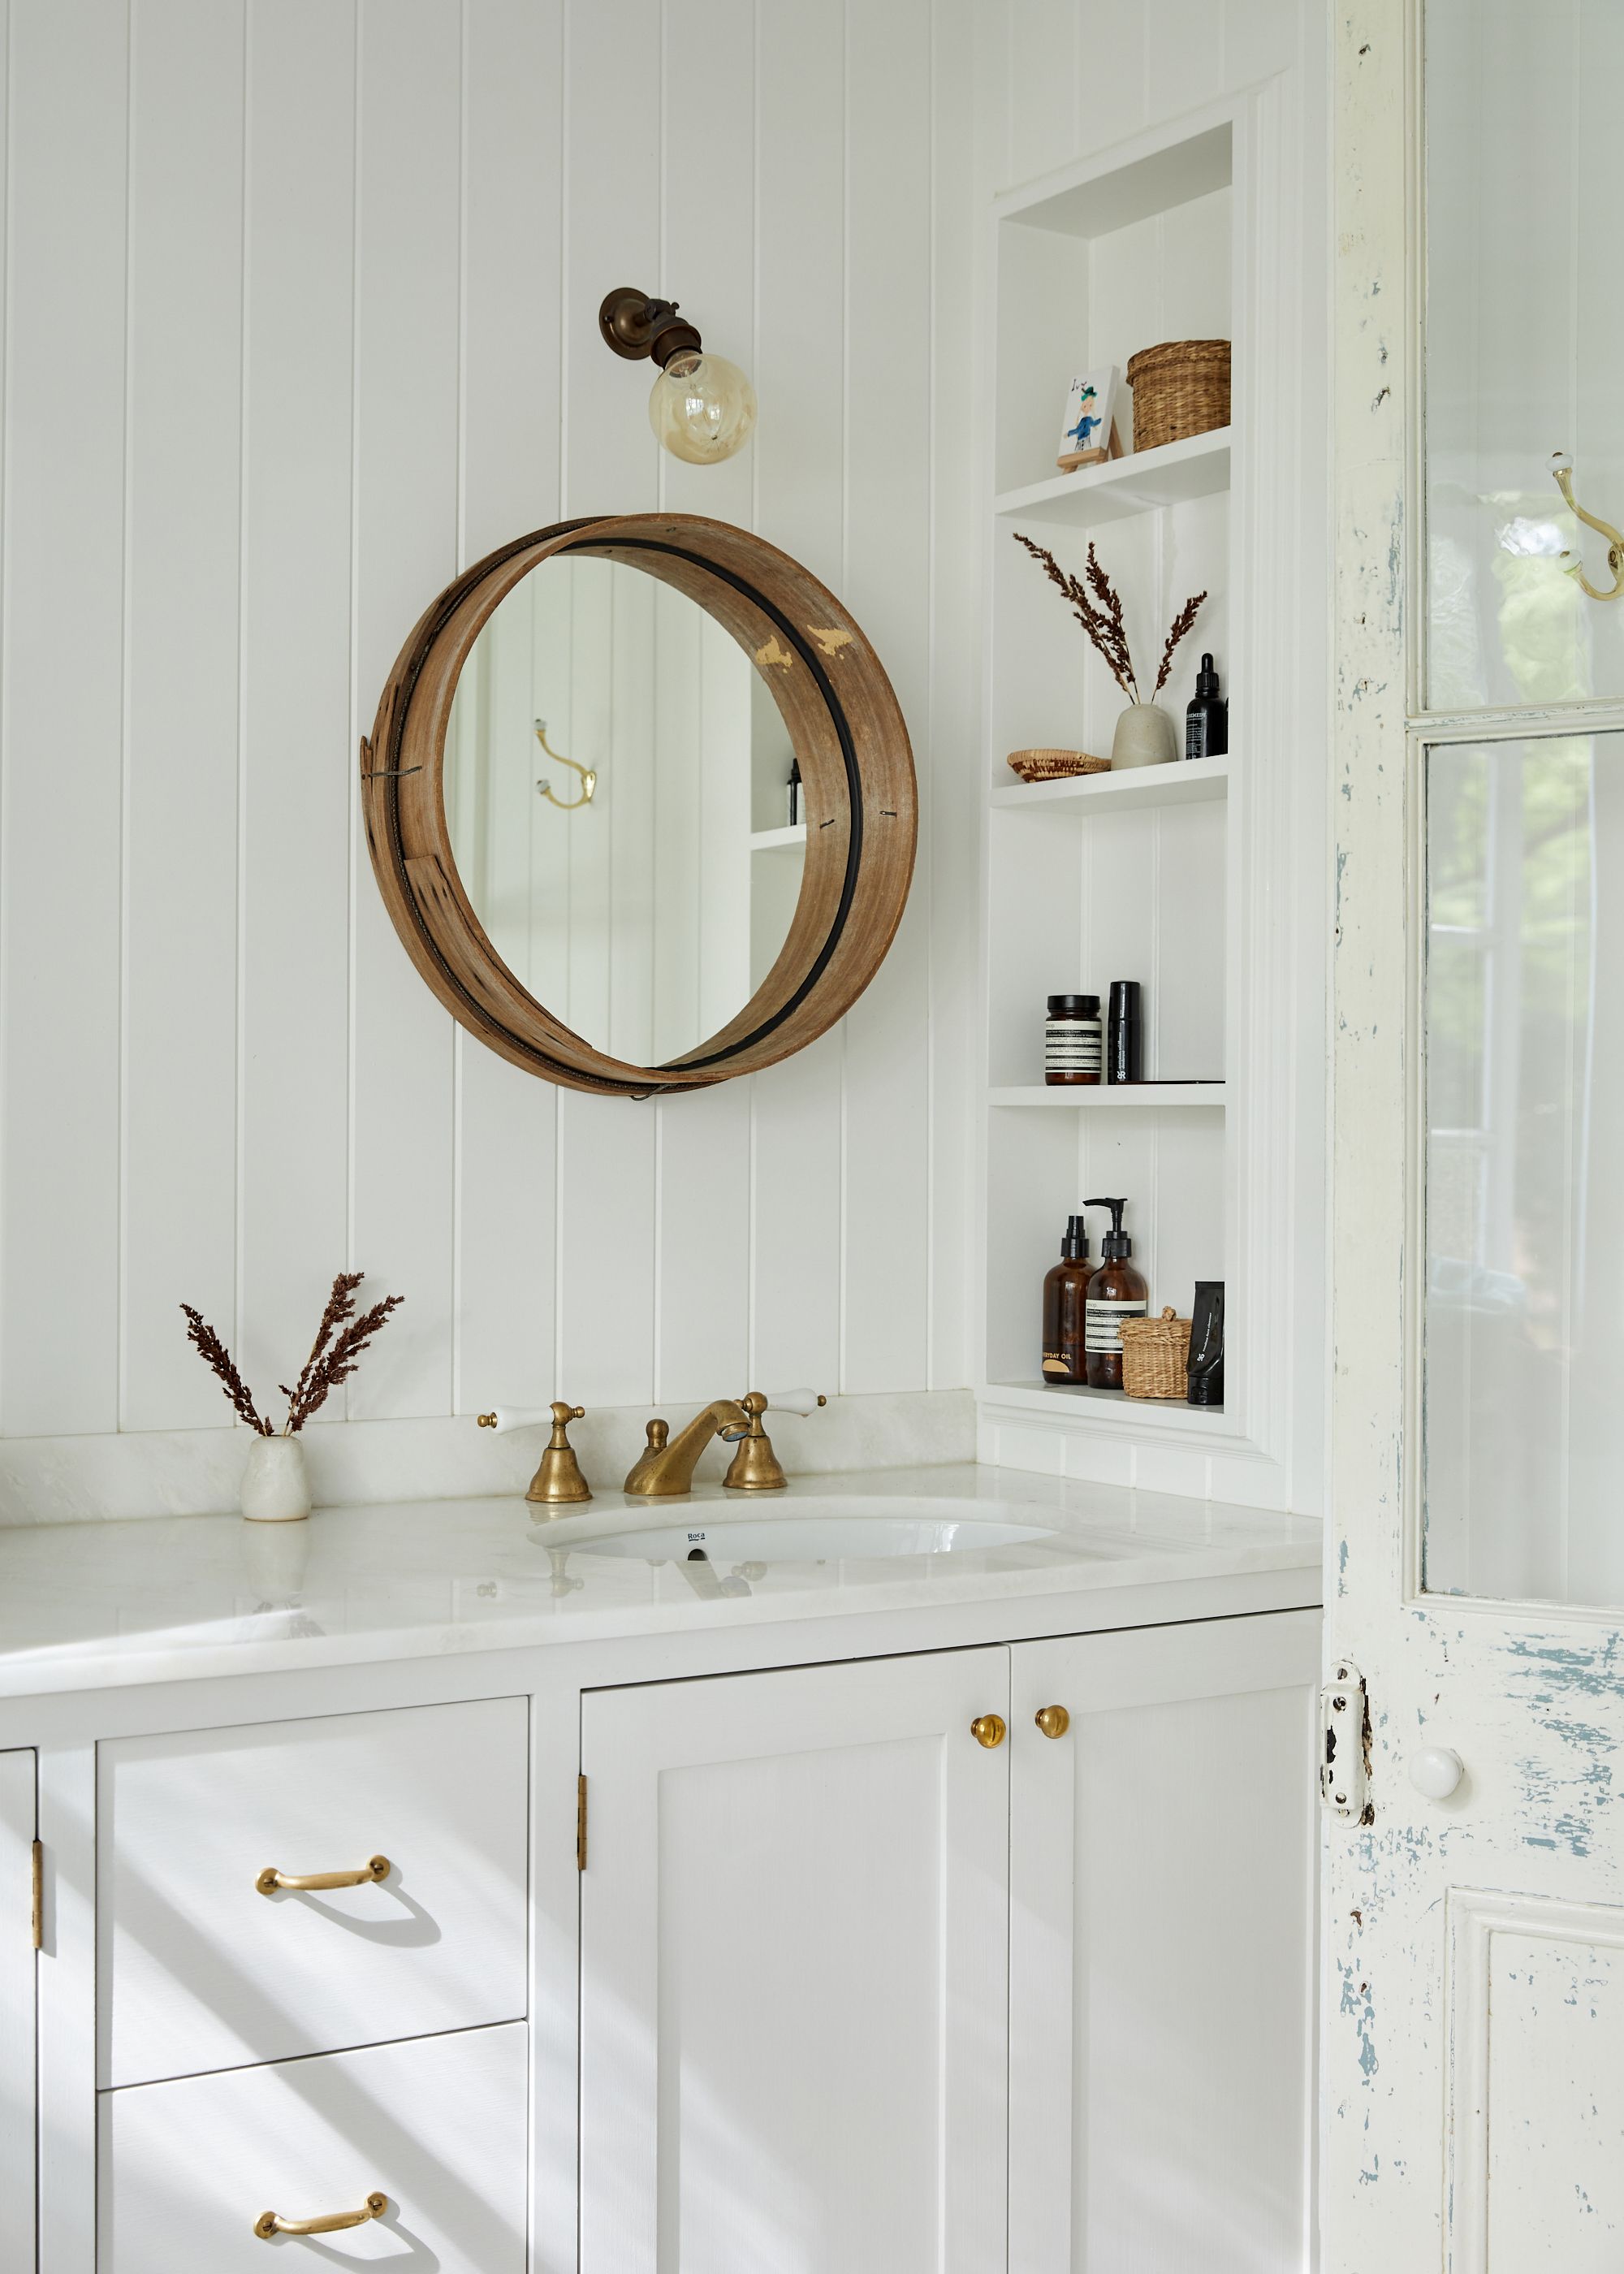 A country-style rustic white bathroom with a featured gold circular mirror 